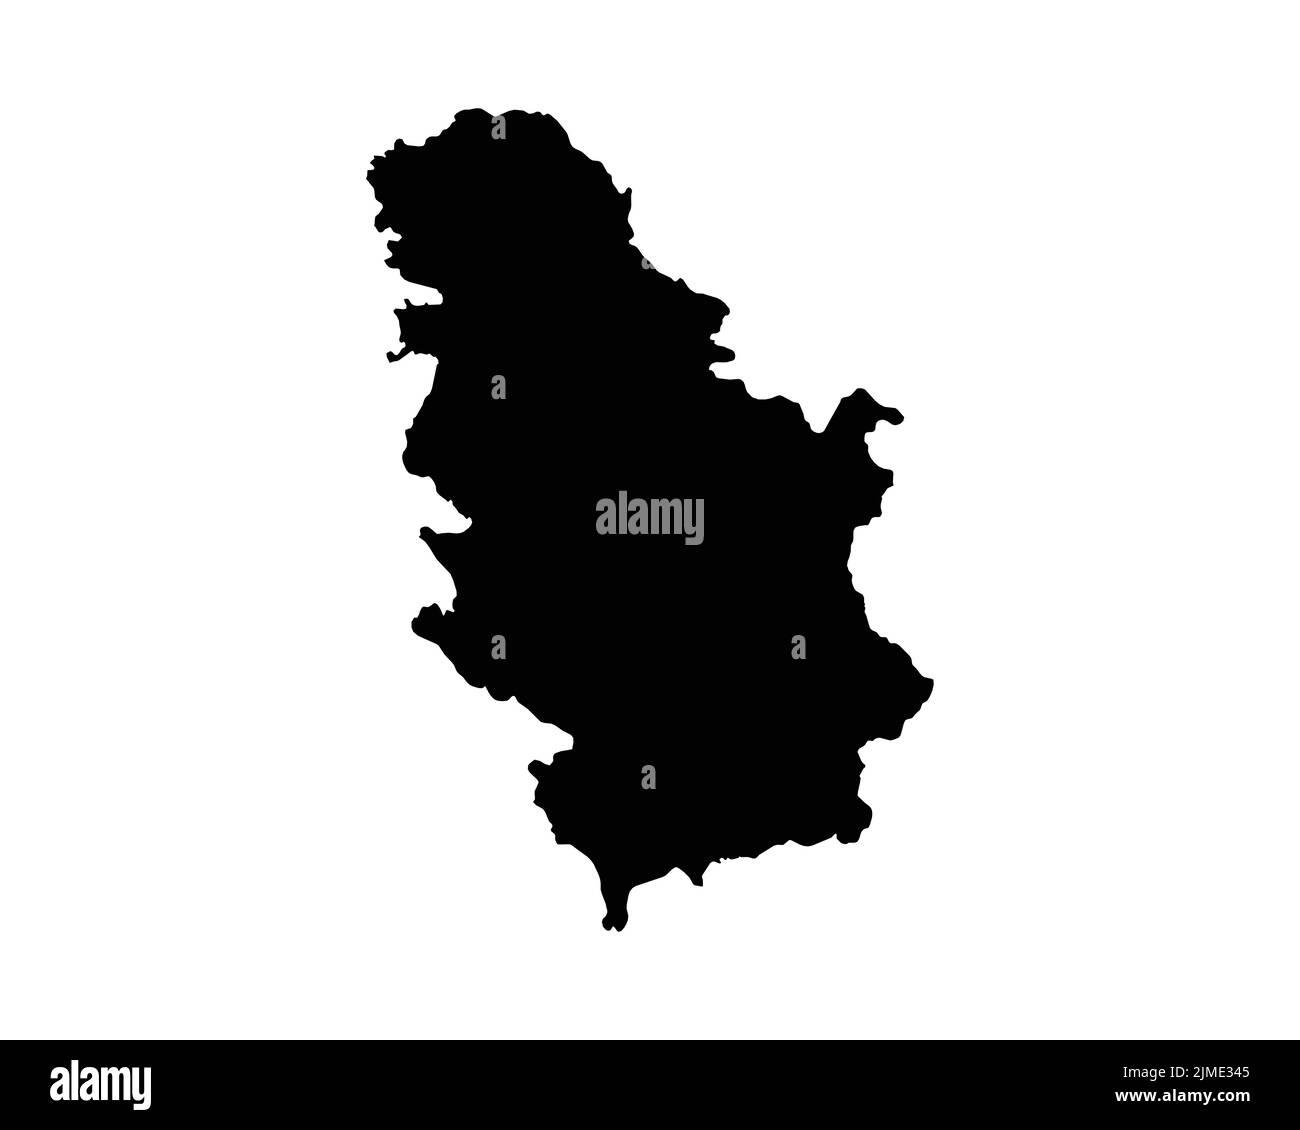 Serbia Map. Serbian Country Map. Black and White Srbija National Nation Geography Outline Border Boundary Territory Shape Vector Illustration EPS Clip Stock Vector